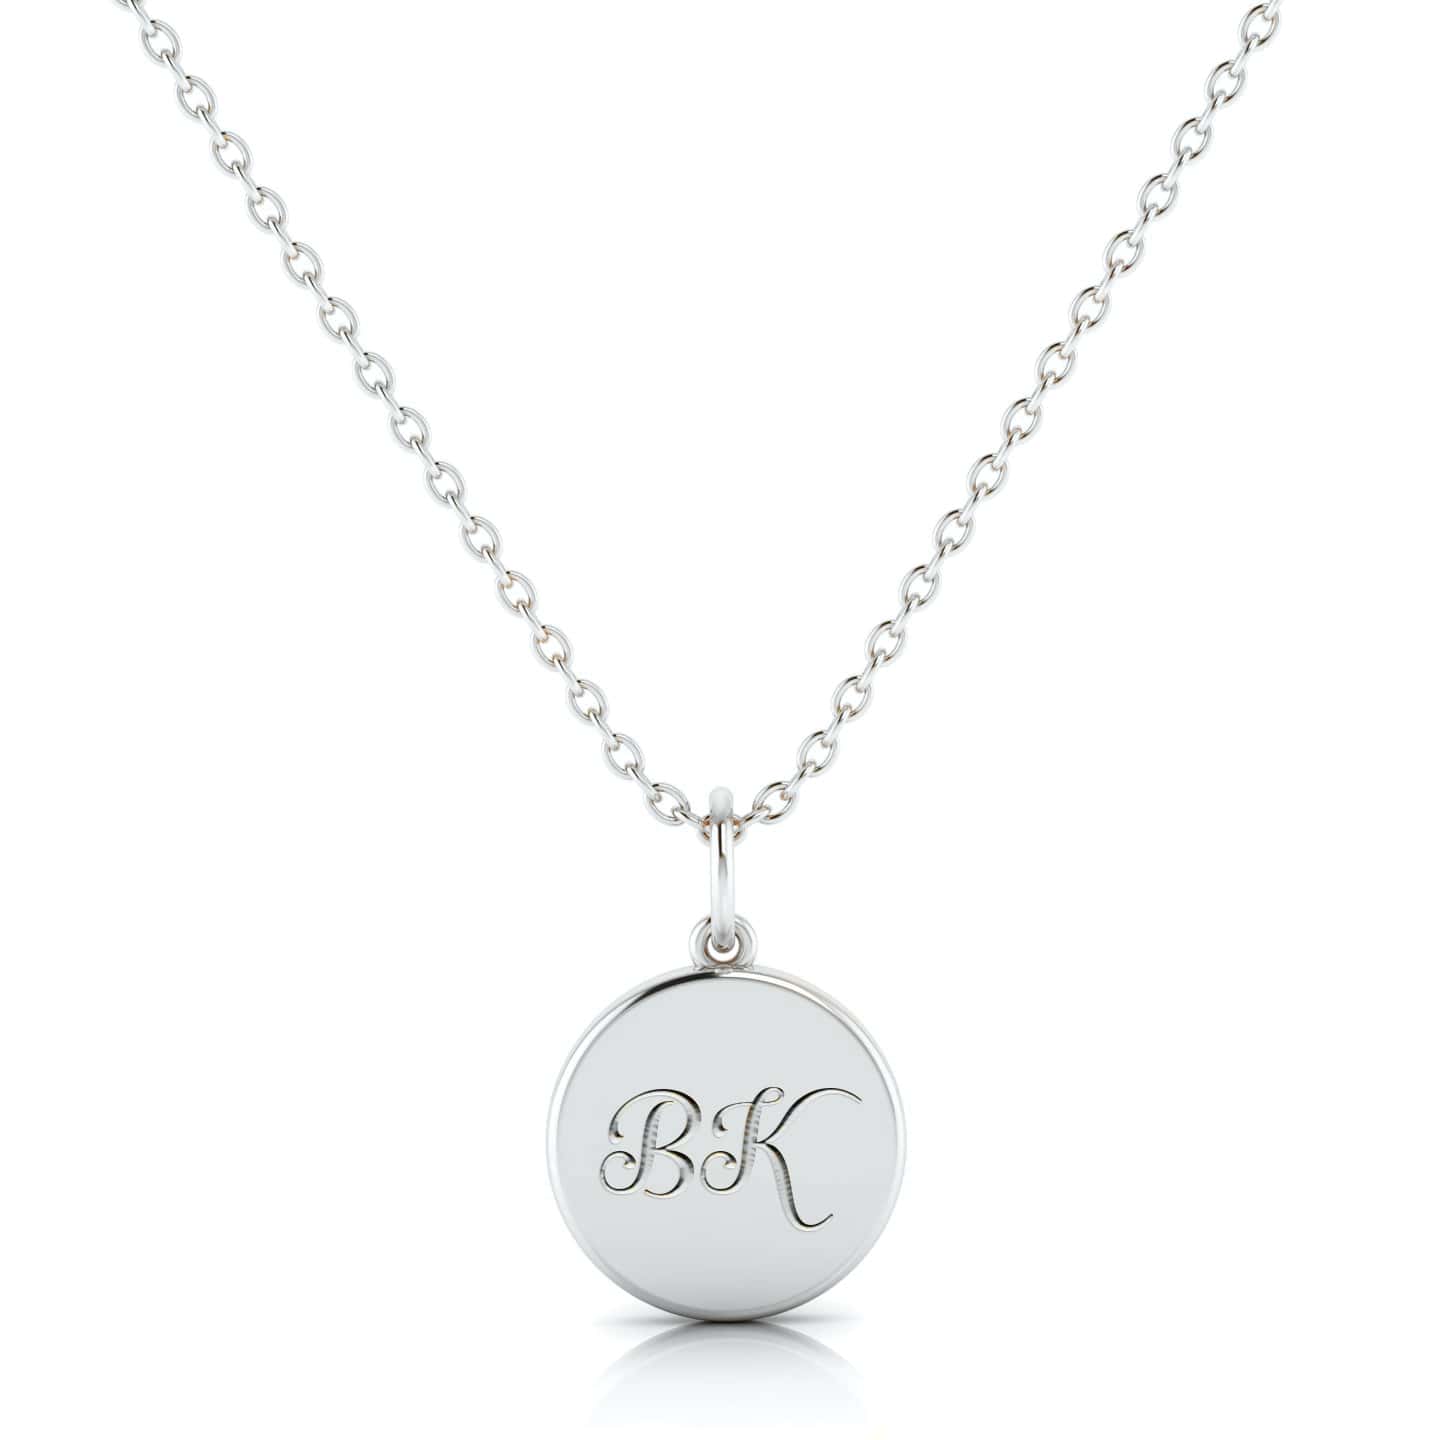 Custom Initial Circle Monogram Pendant Necklace Sterling Silver - NG24